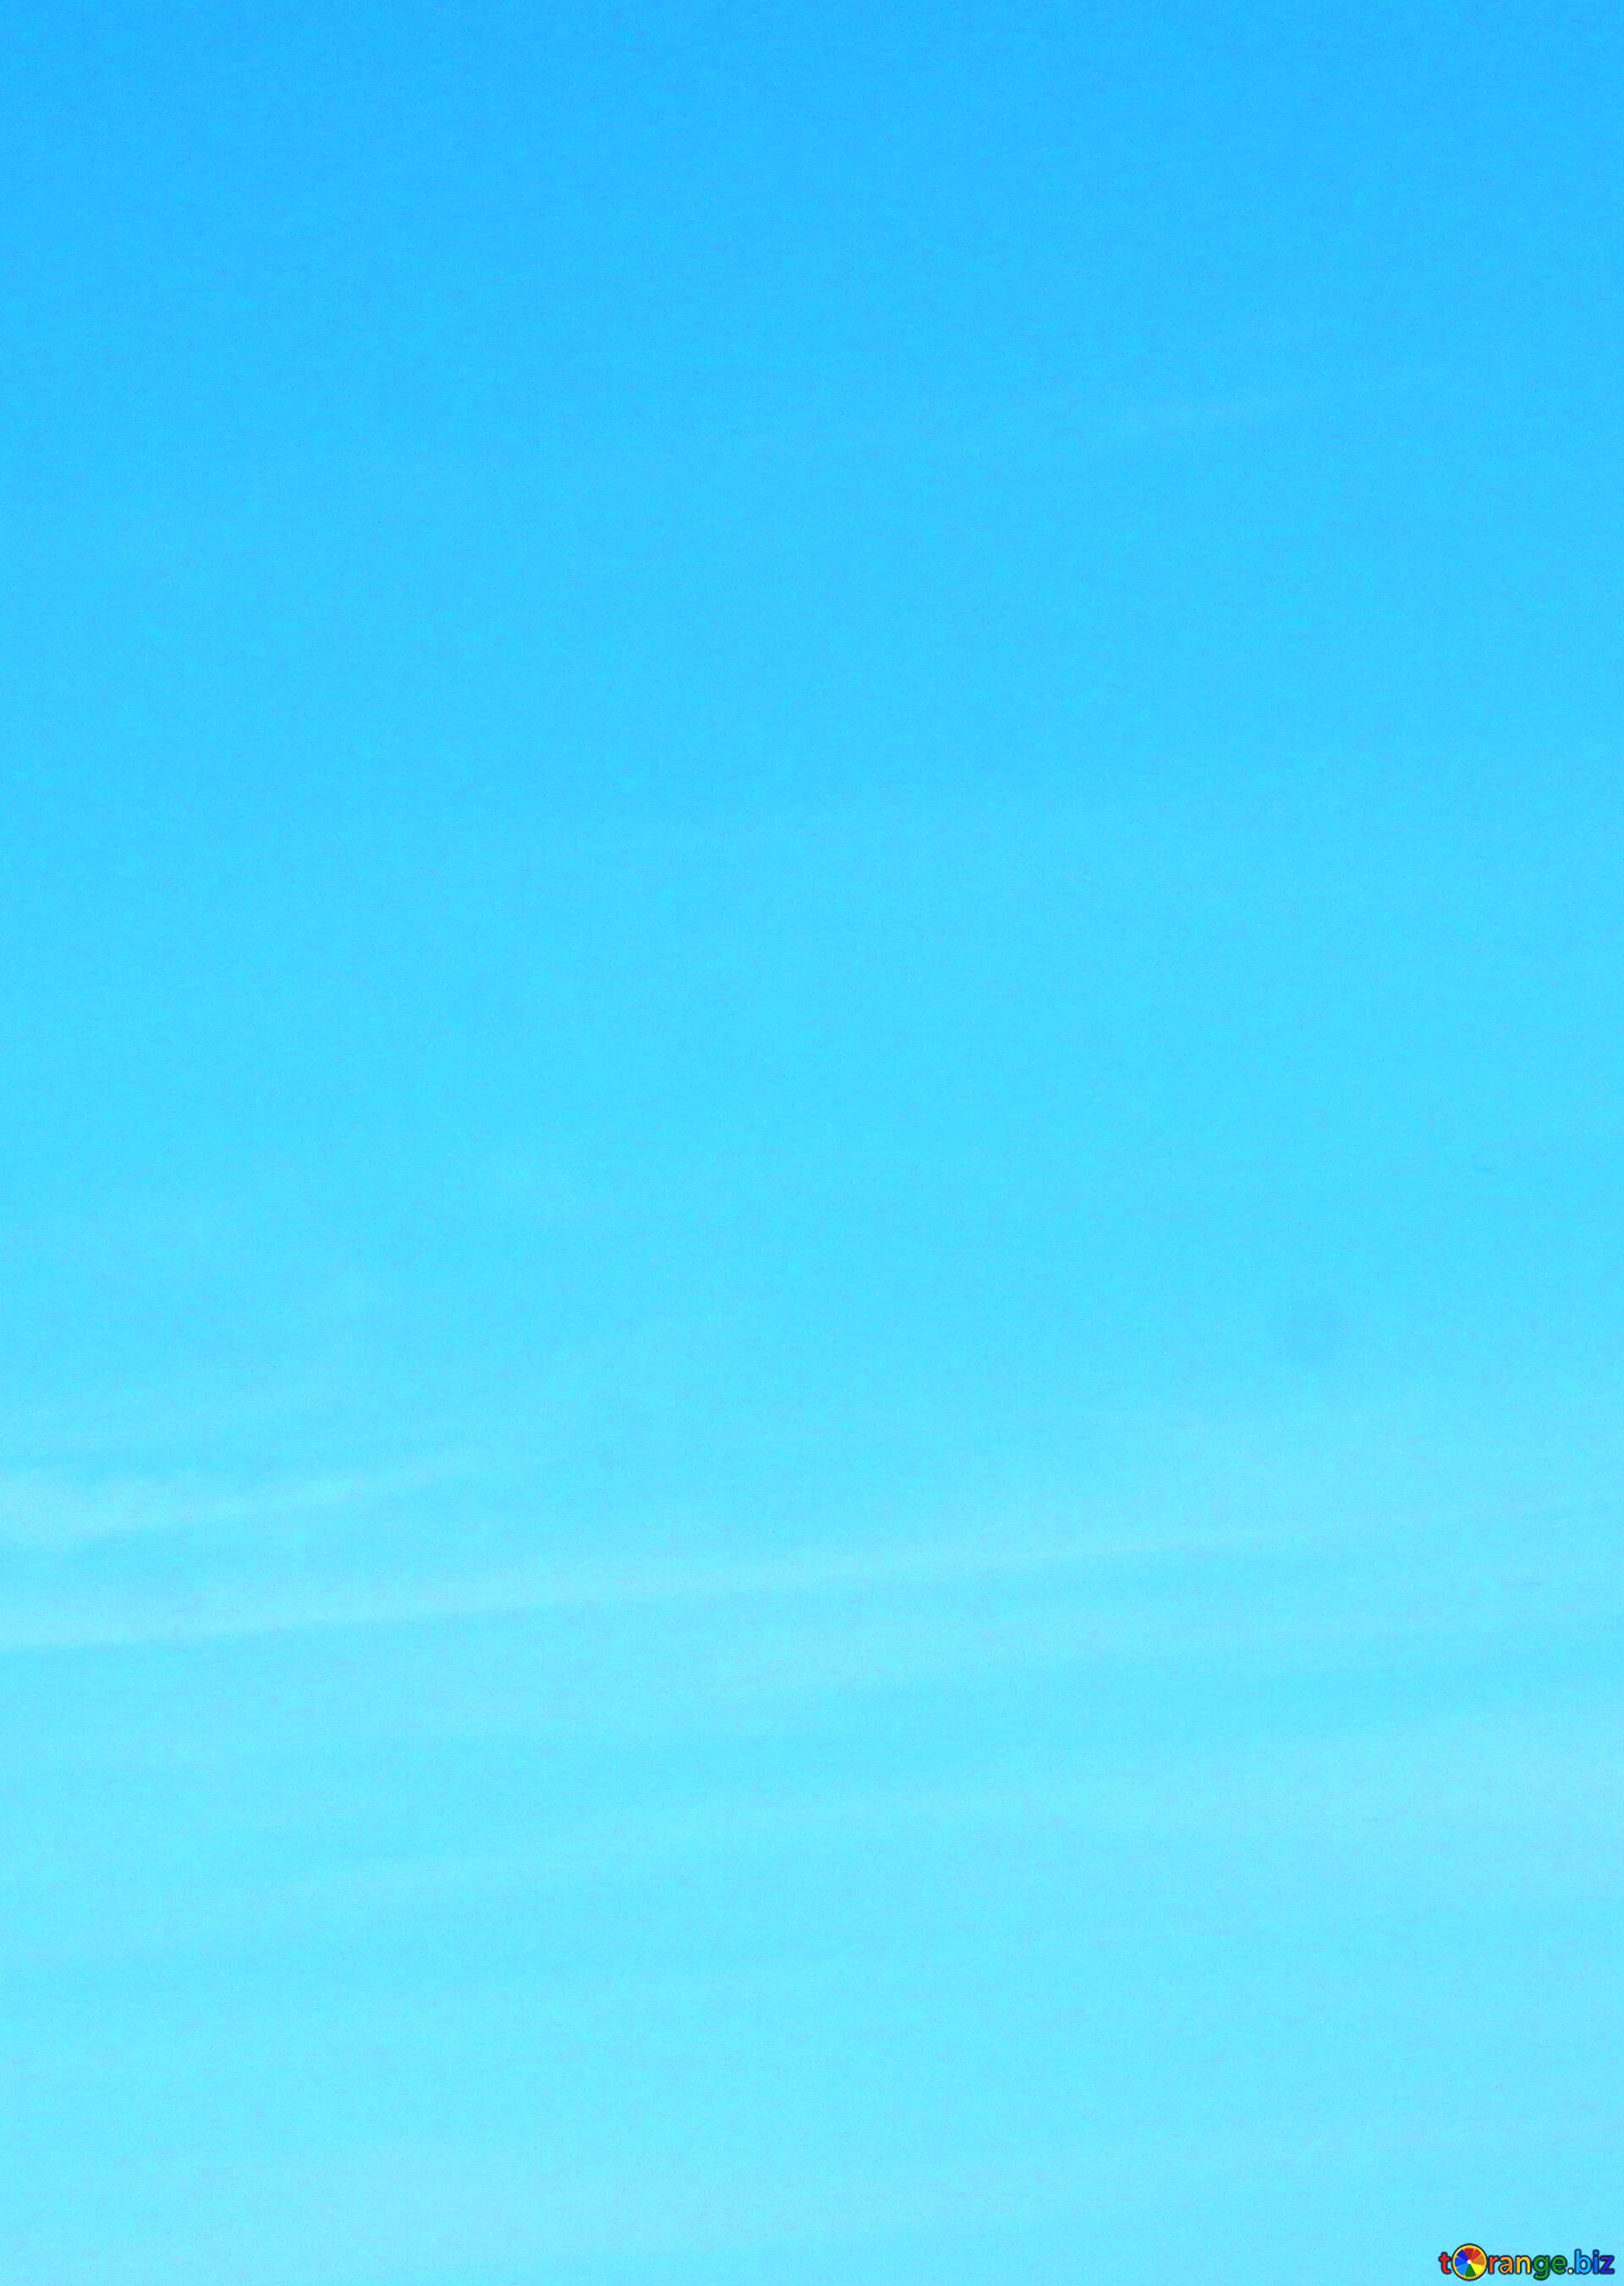 Download free picture Clear sky blue gradient background on CC-BY